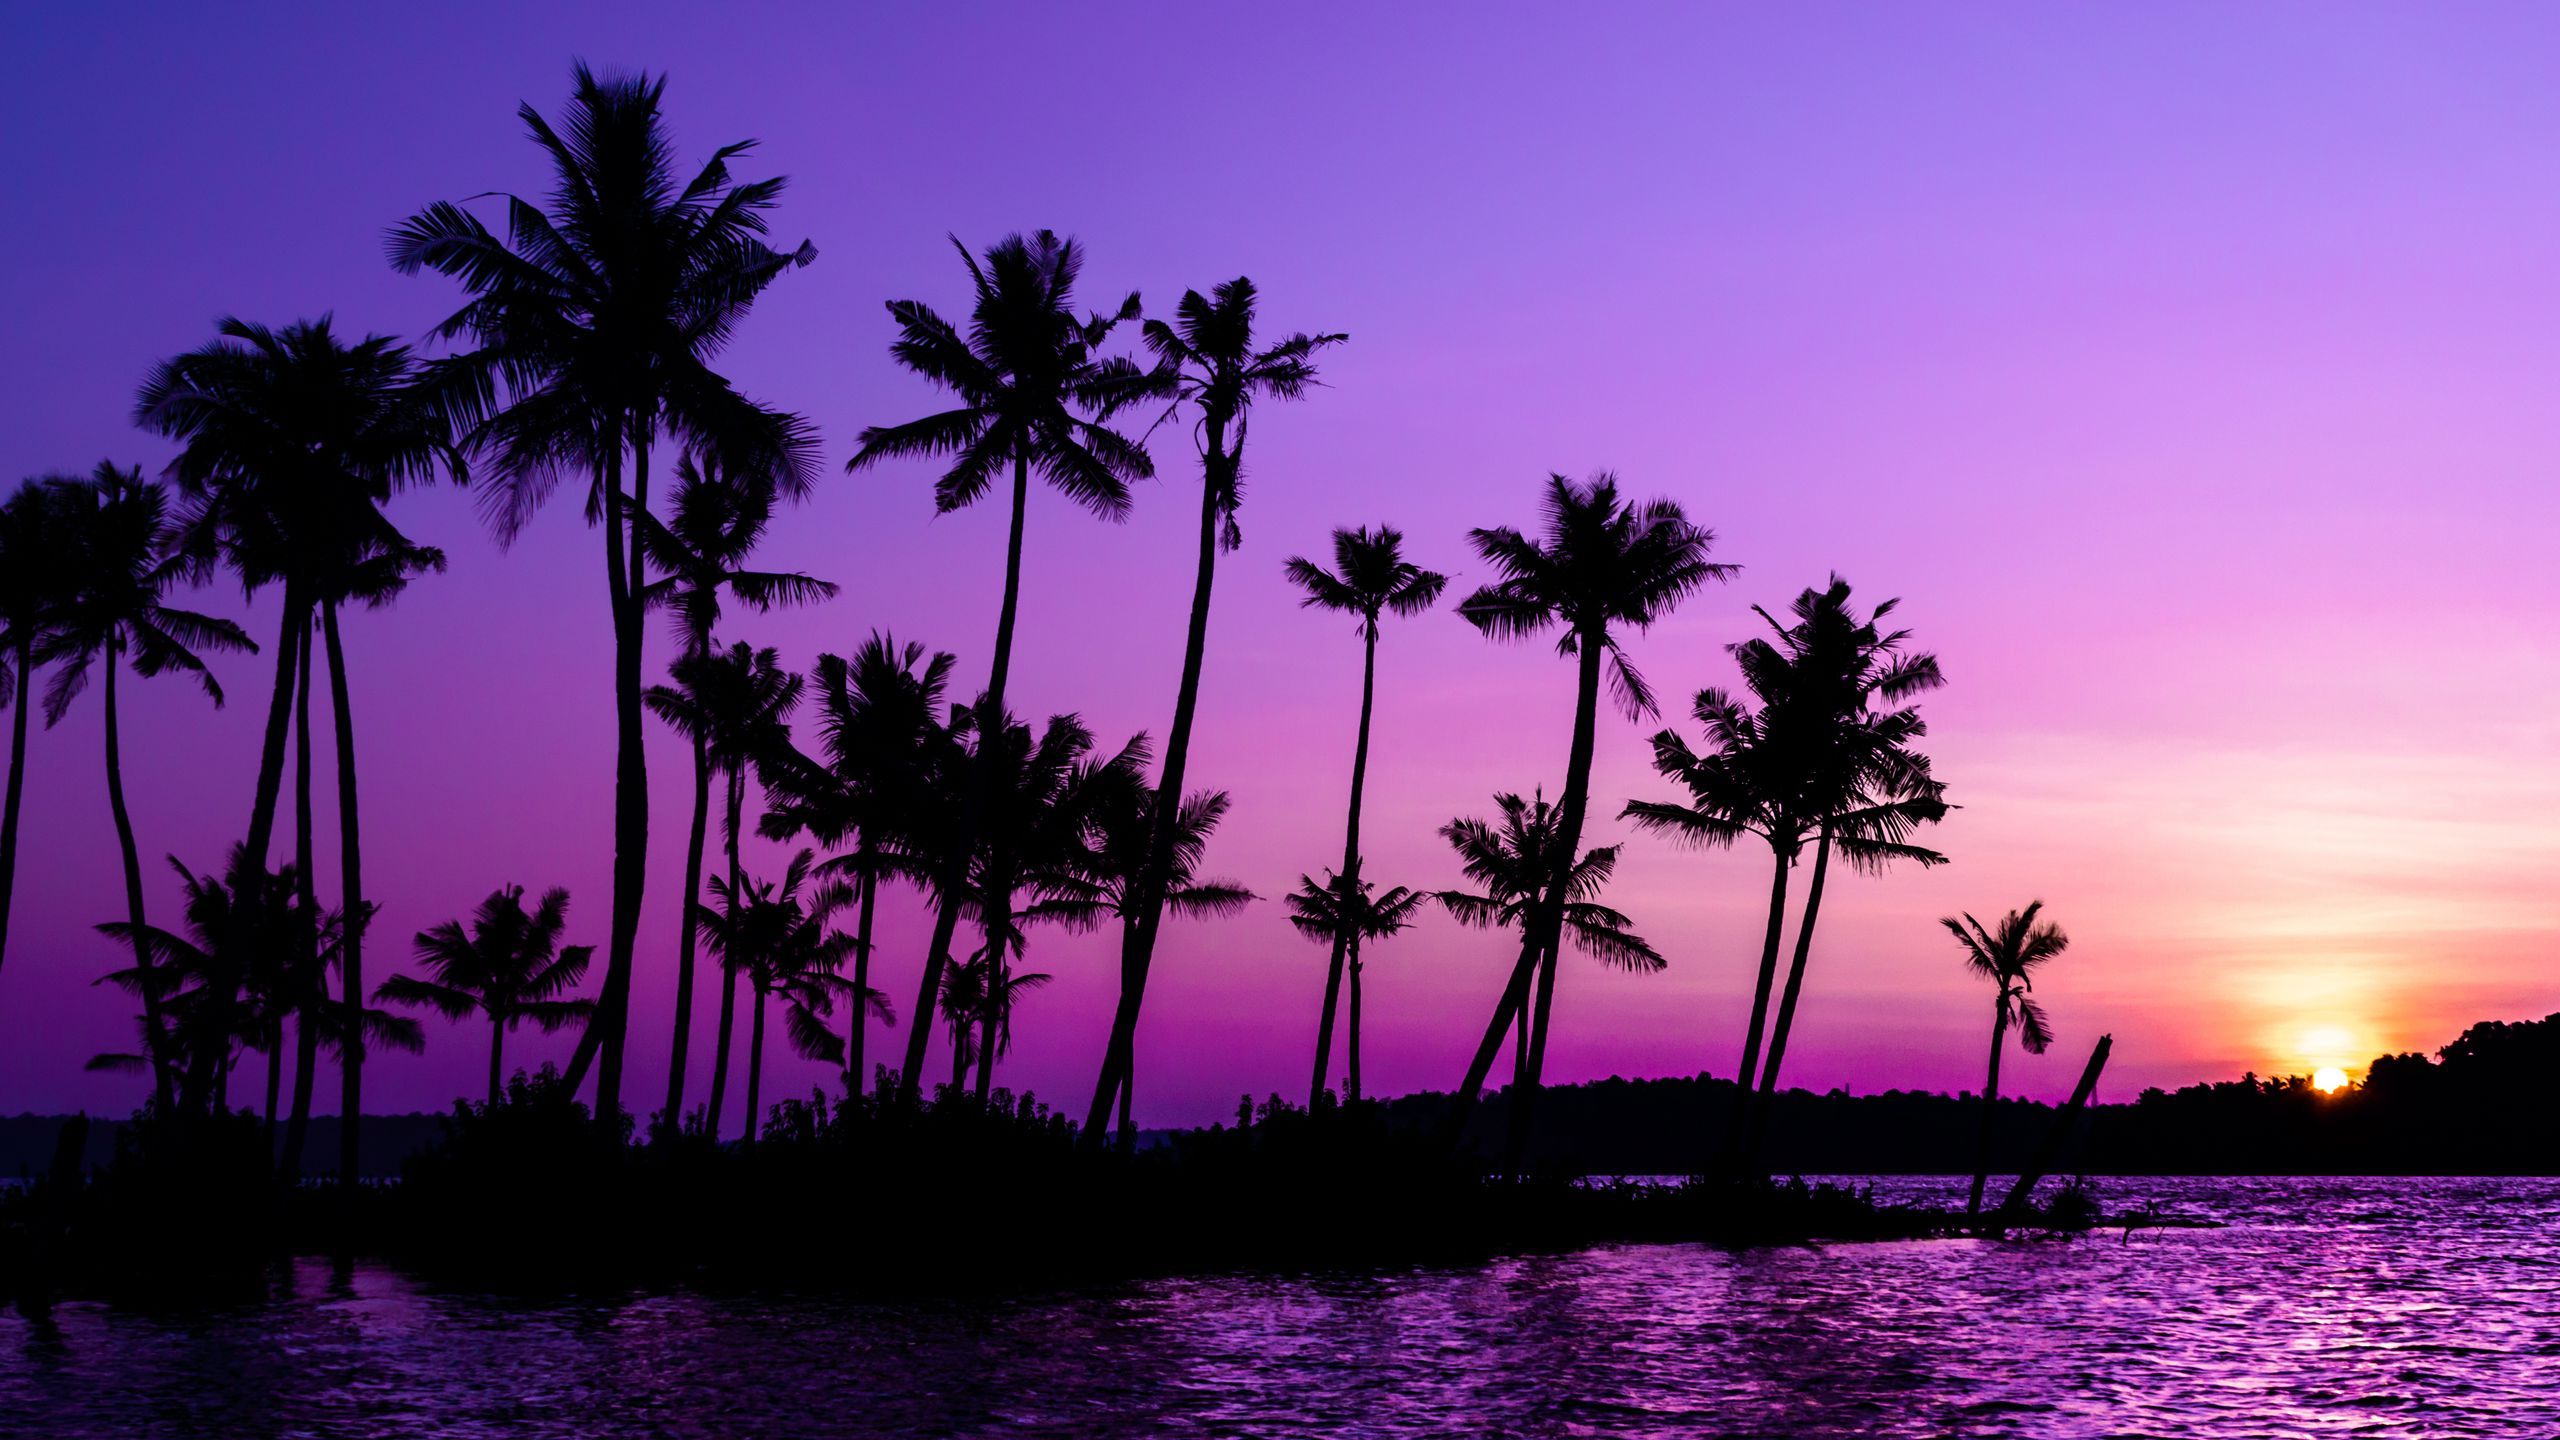 Download wallpaper 2560x1440 palm trees, silhouette, sunset, purple widescreen 16:9 HD background